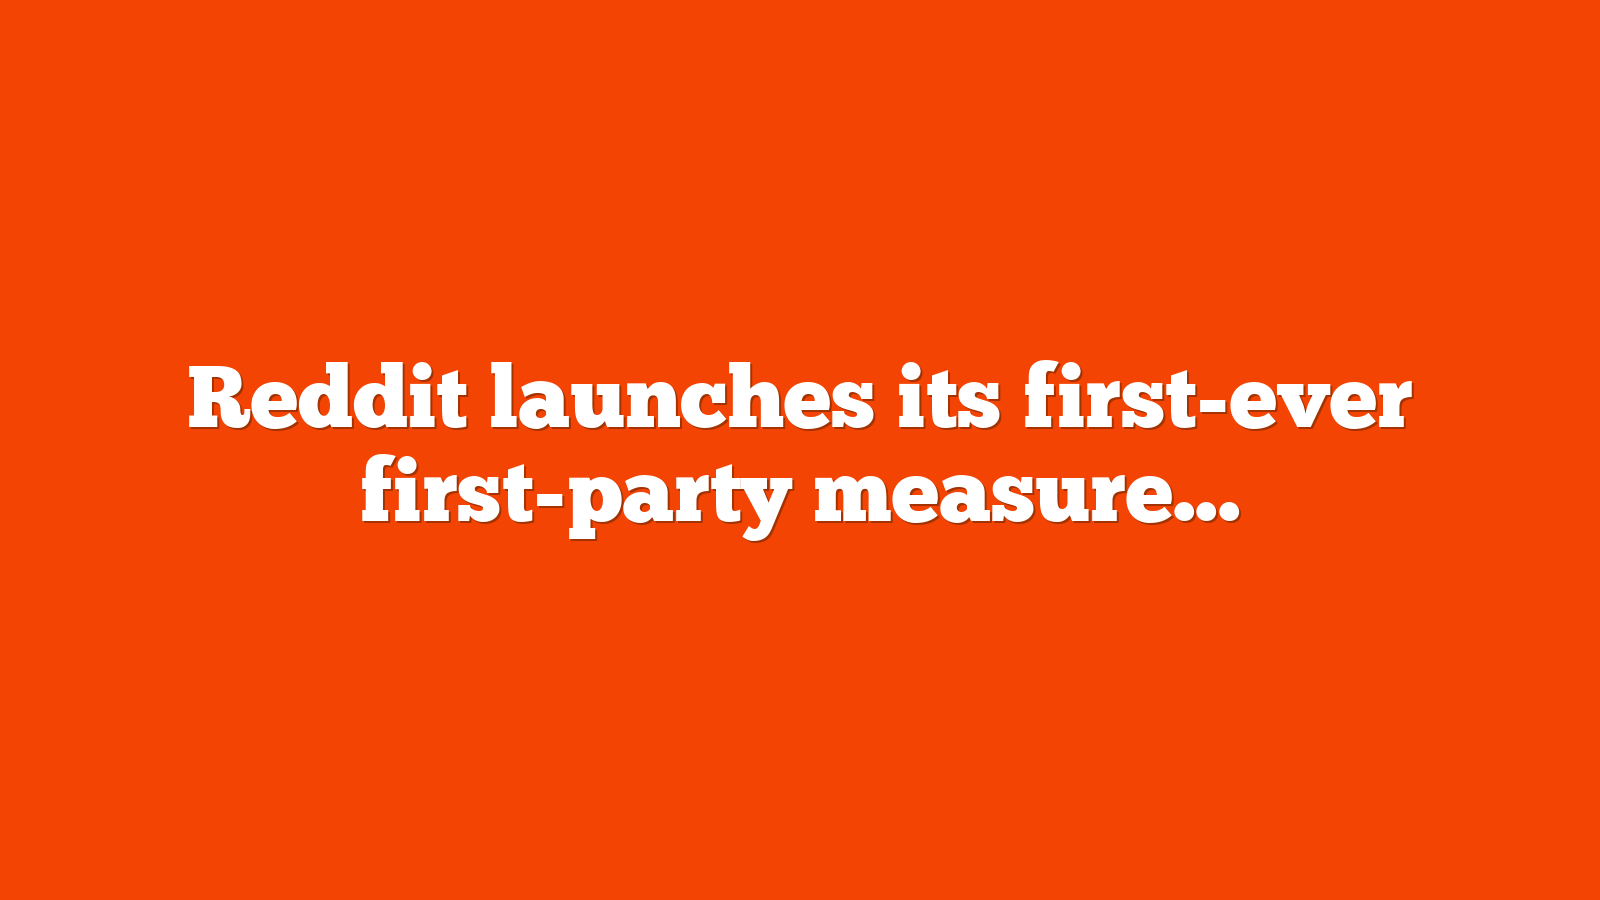 Reddit launches its first ever first party measurement tools